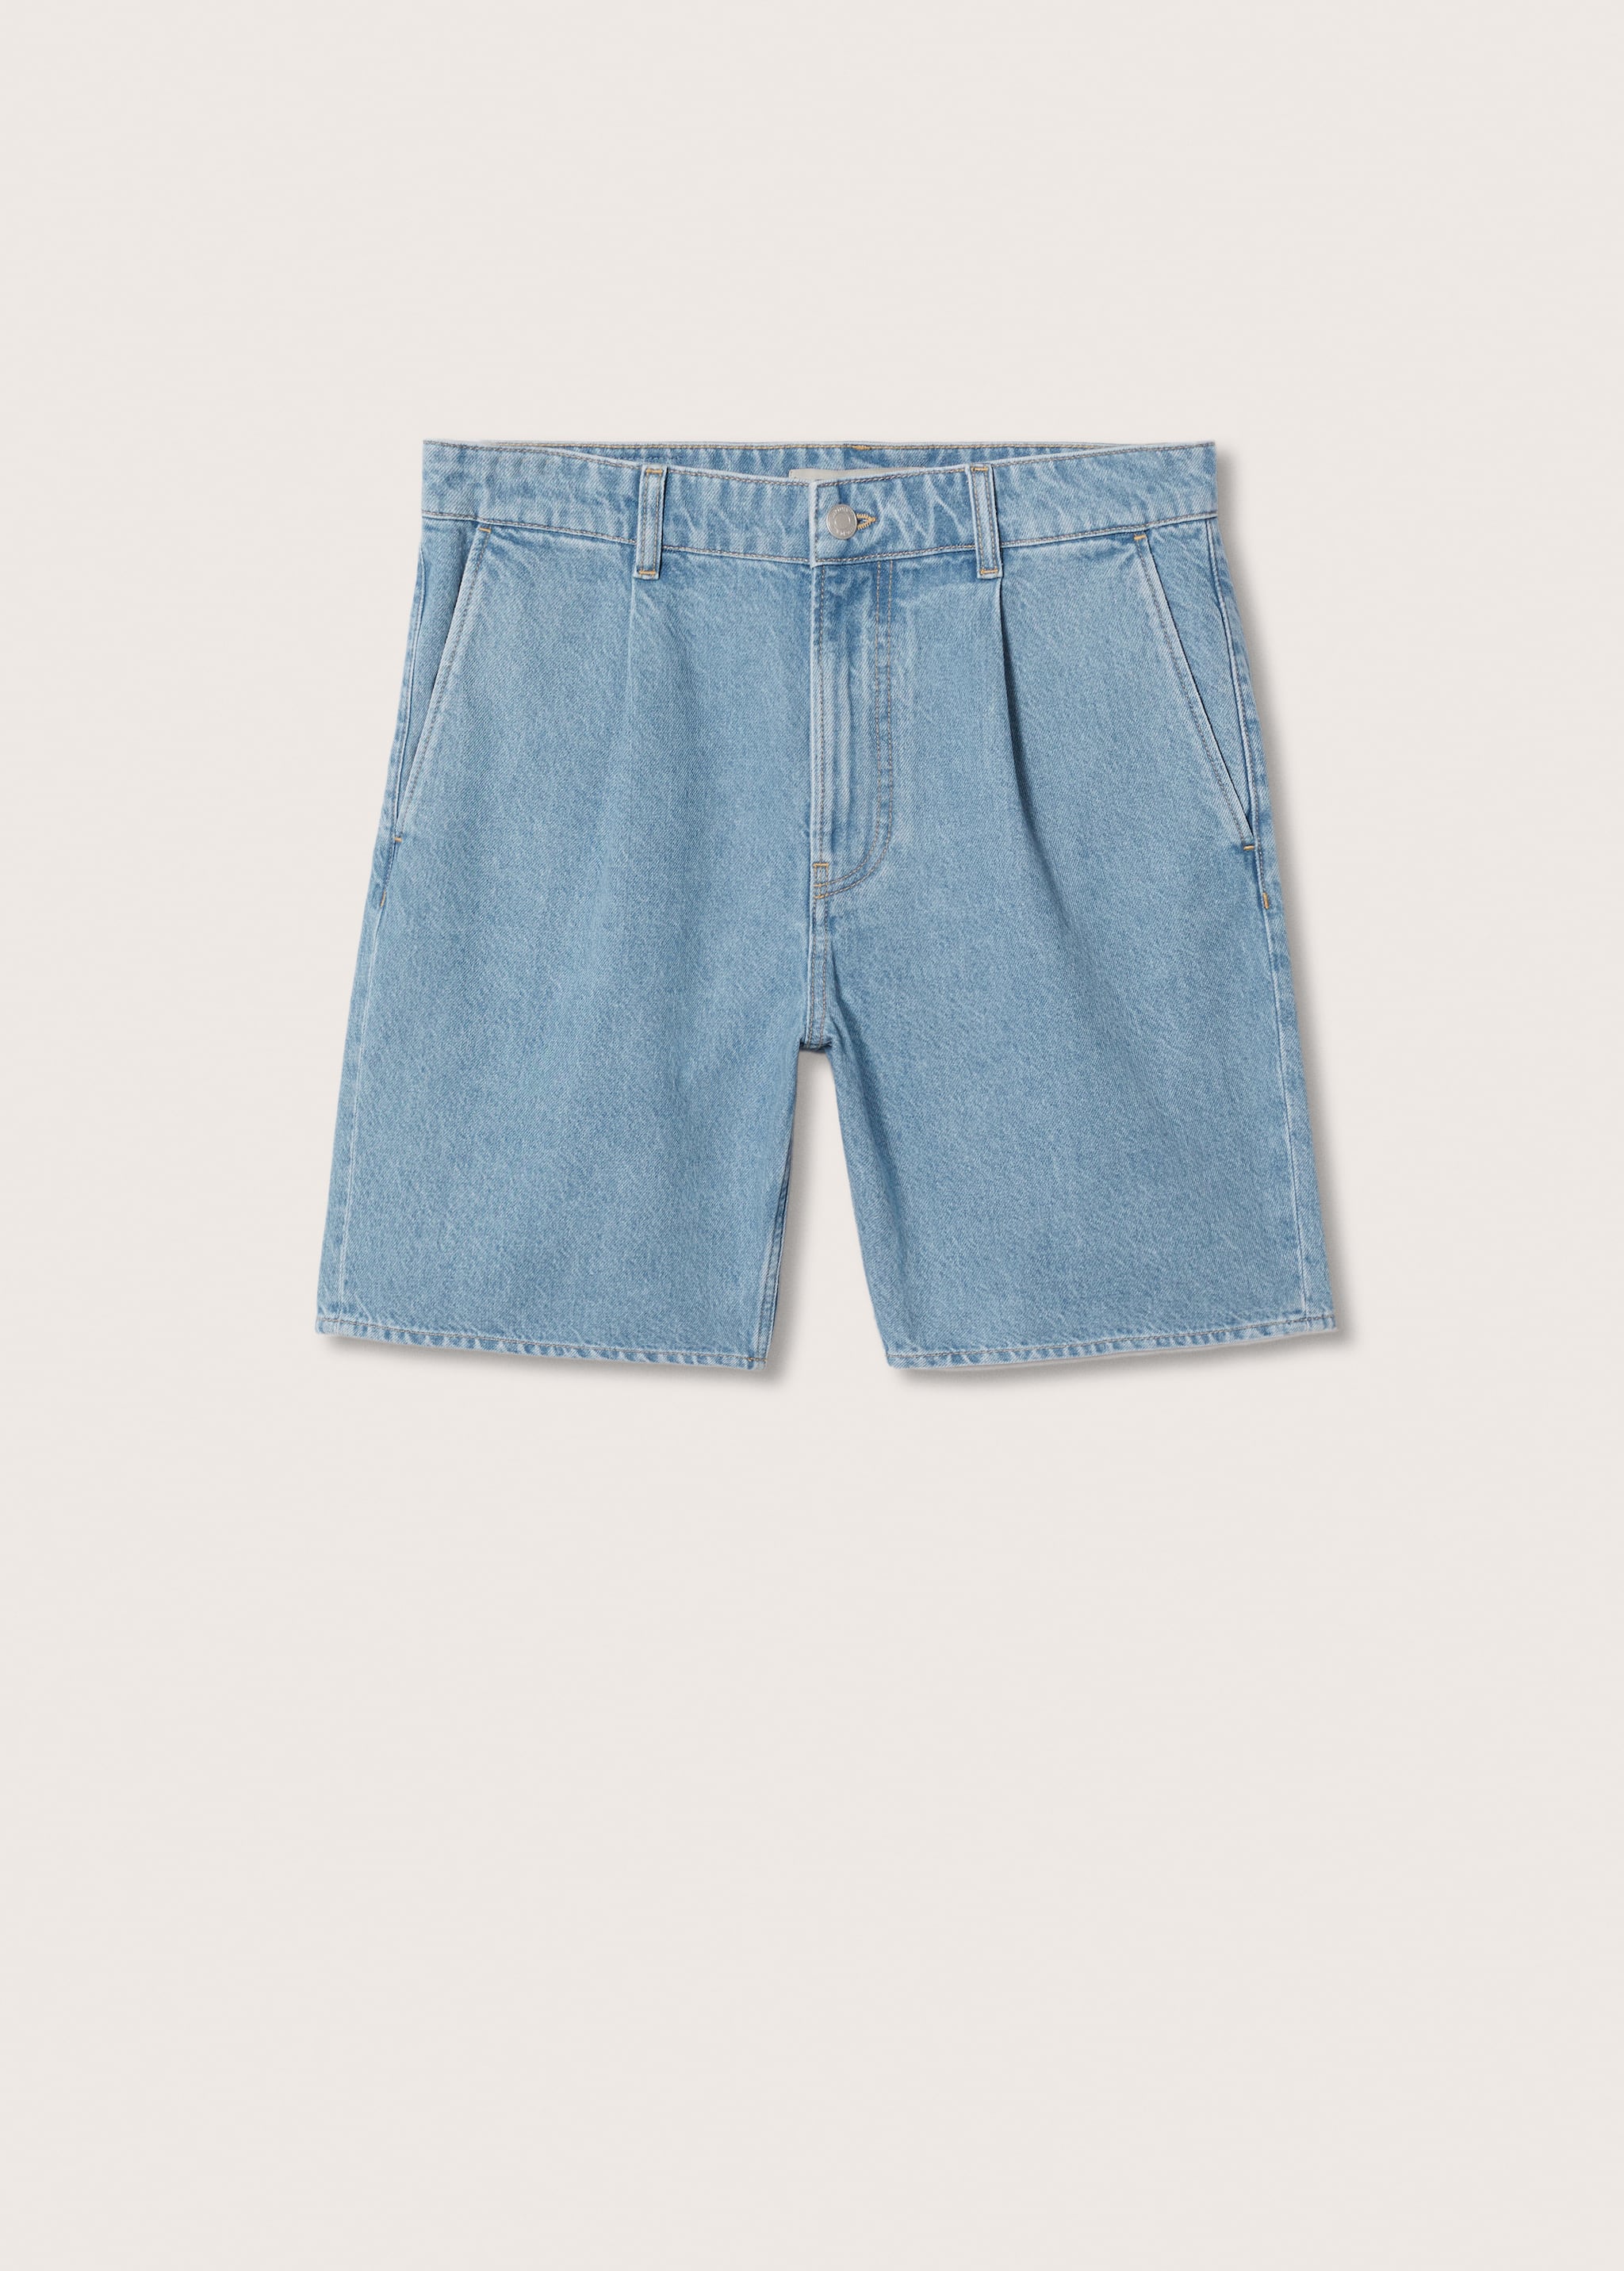 Pleated denim Bermuda shorts - Article without model